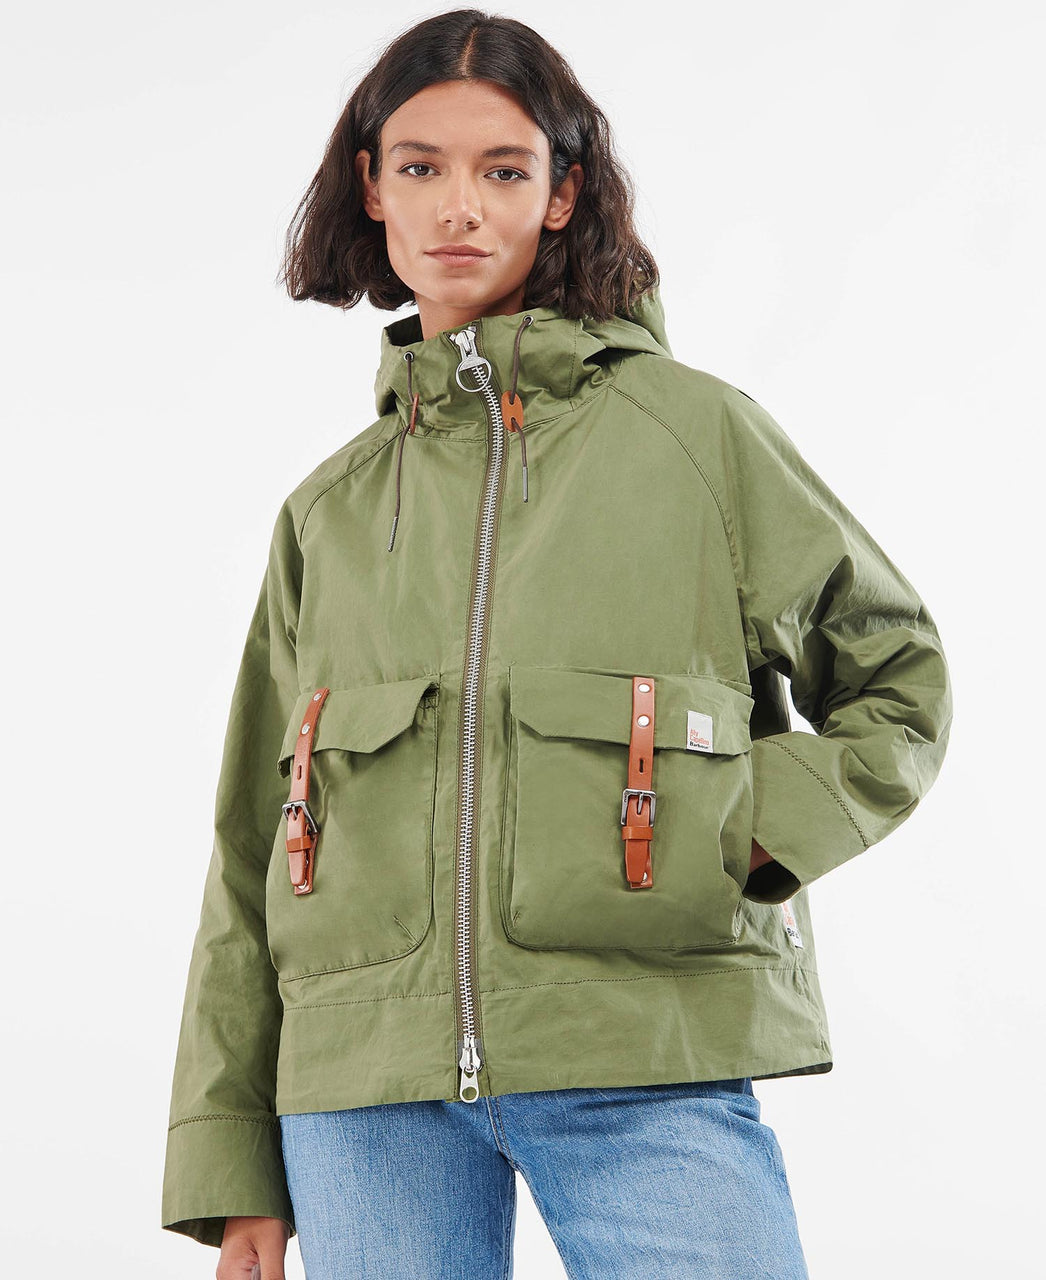 Ally Capellino x Barbour Tip Waxed Cotton Jacket in Army Green